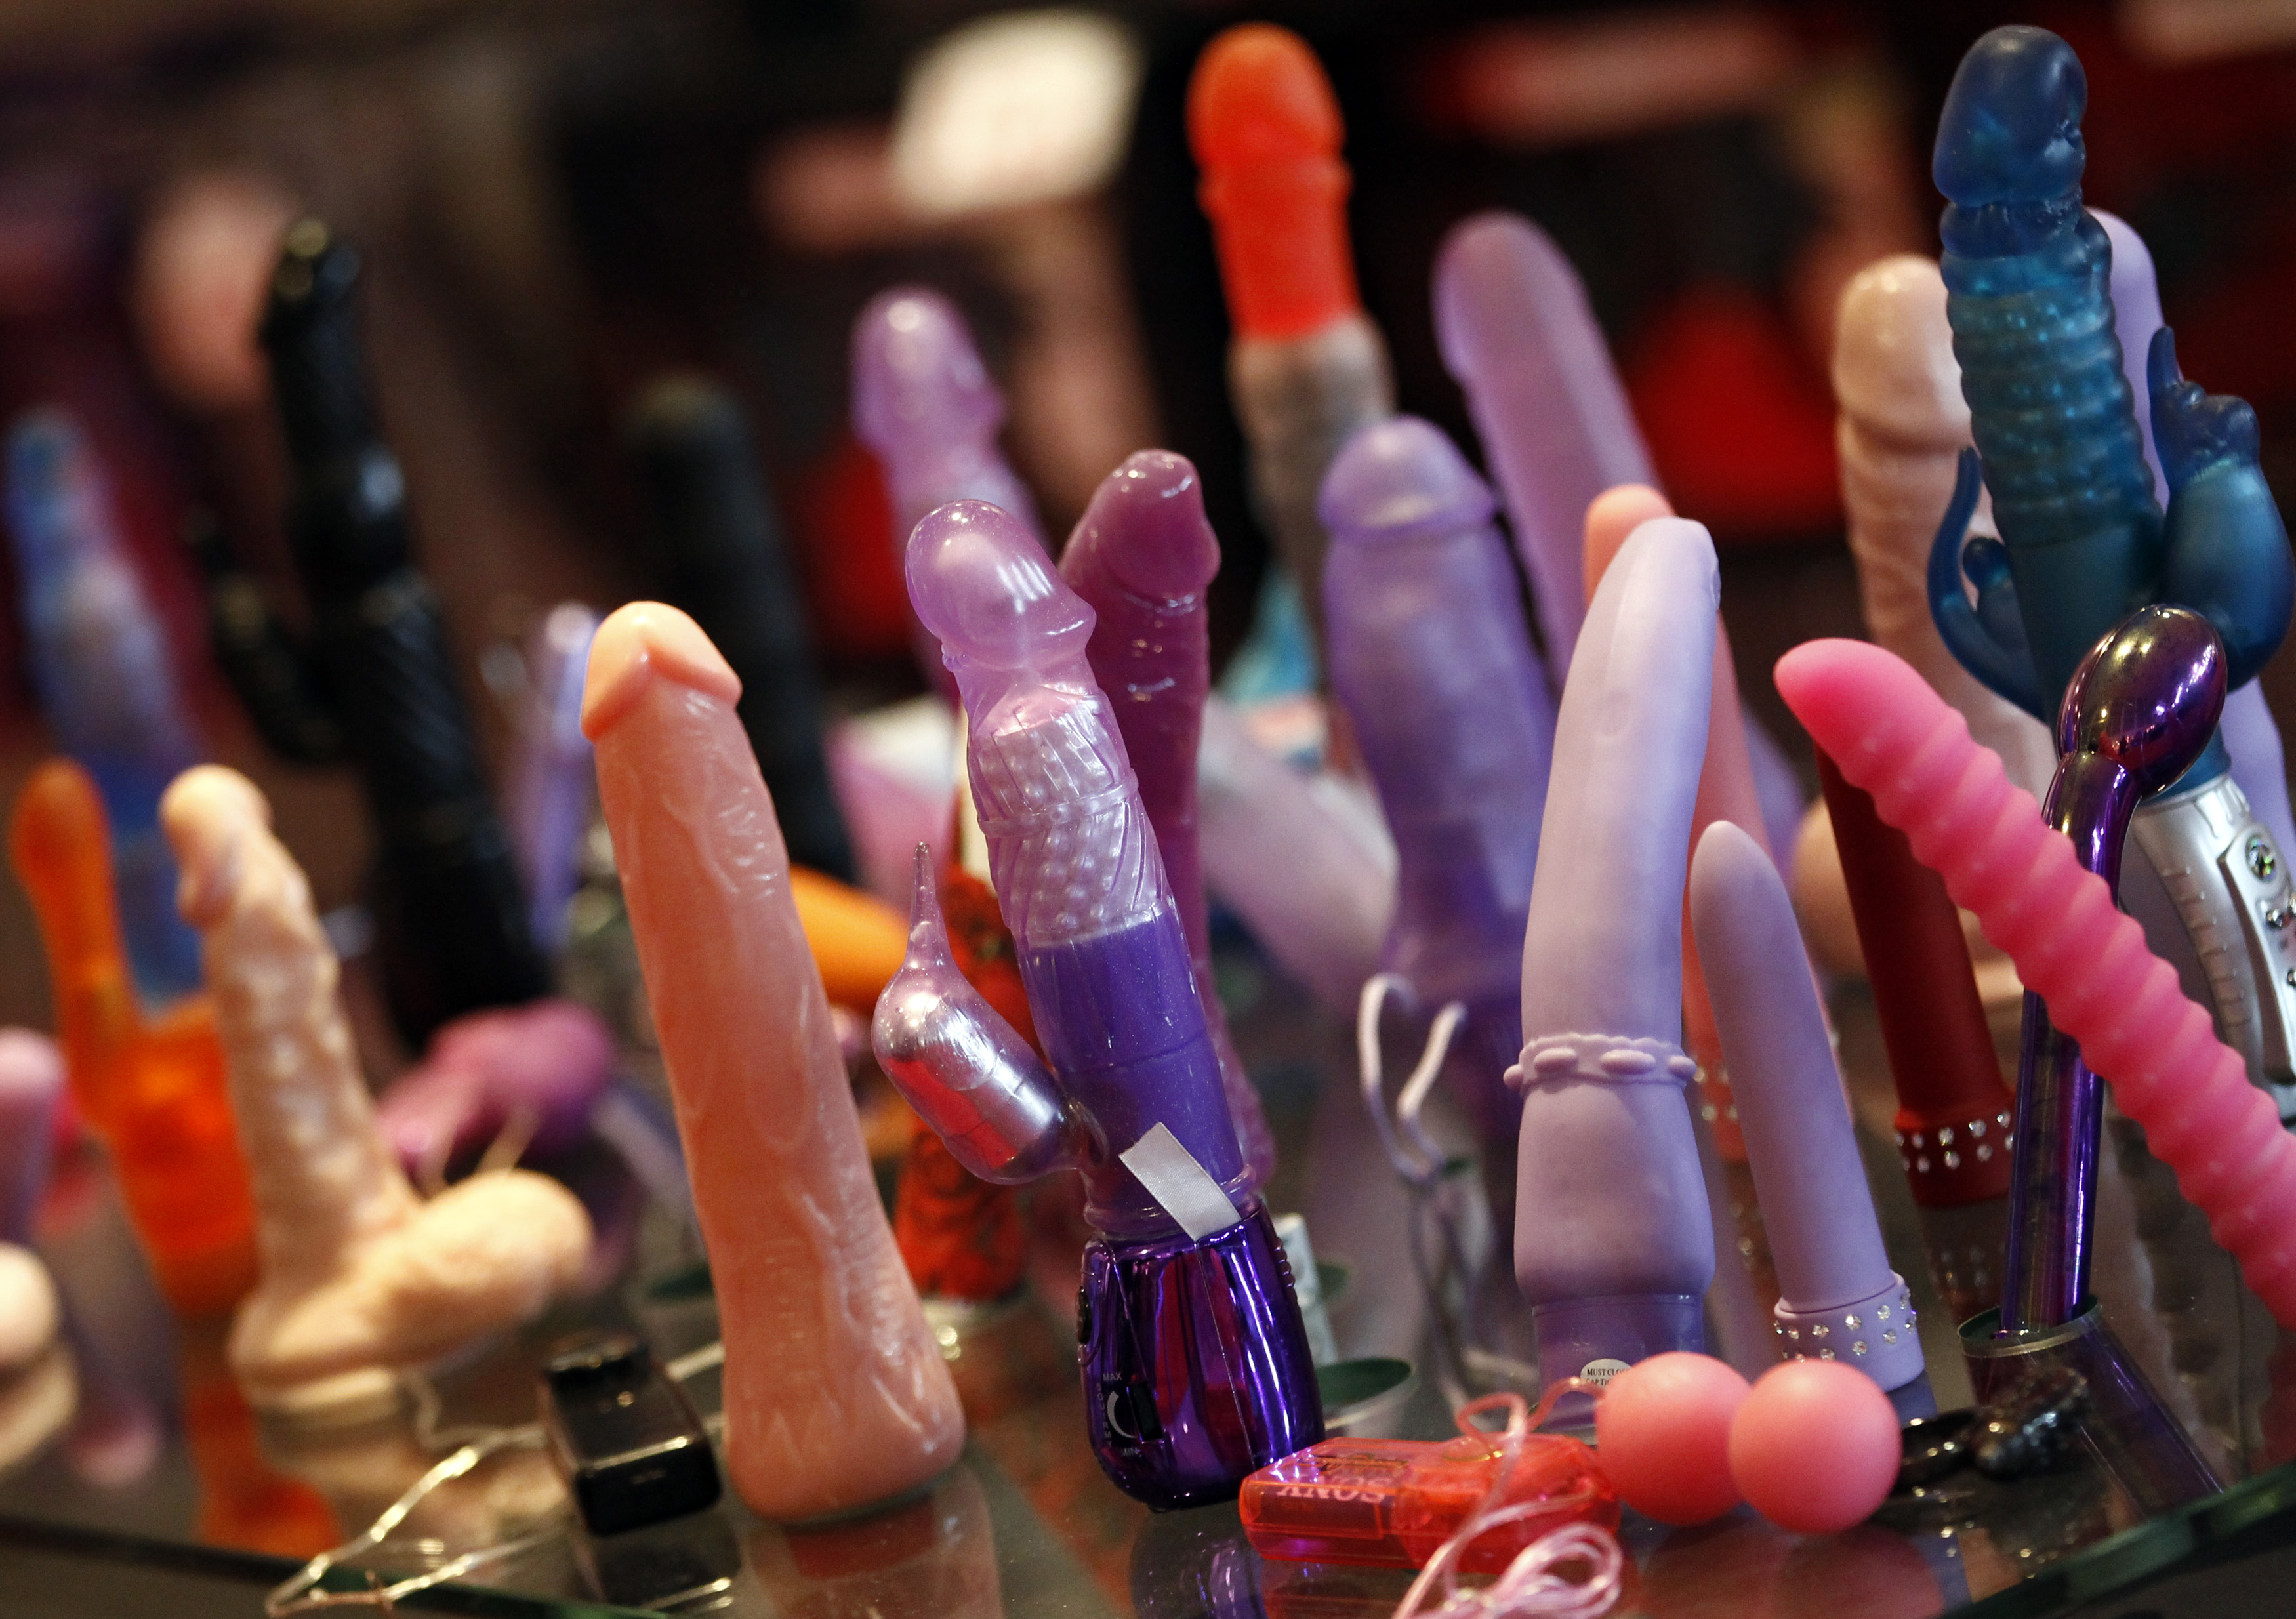 What are the basic needs of using adult toys in sexual intercourse?